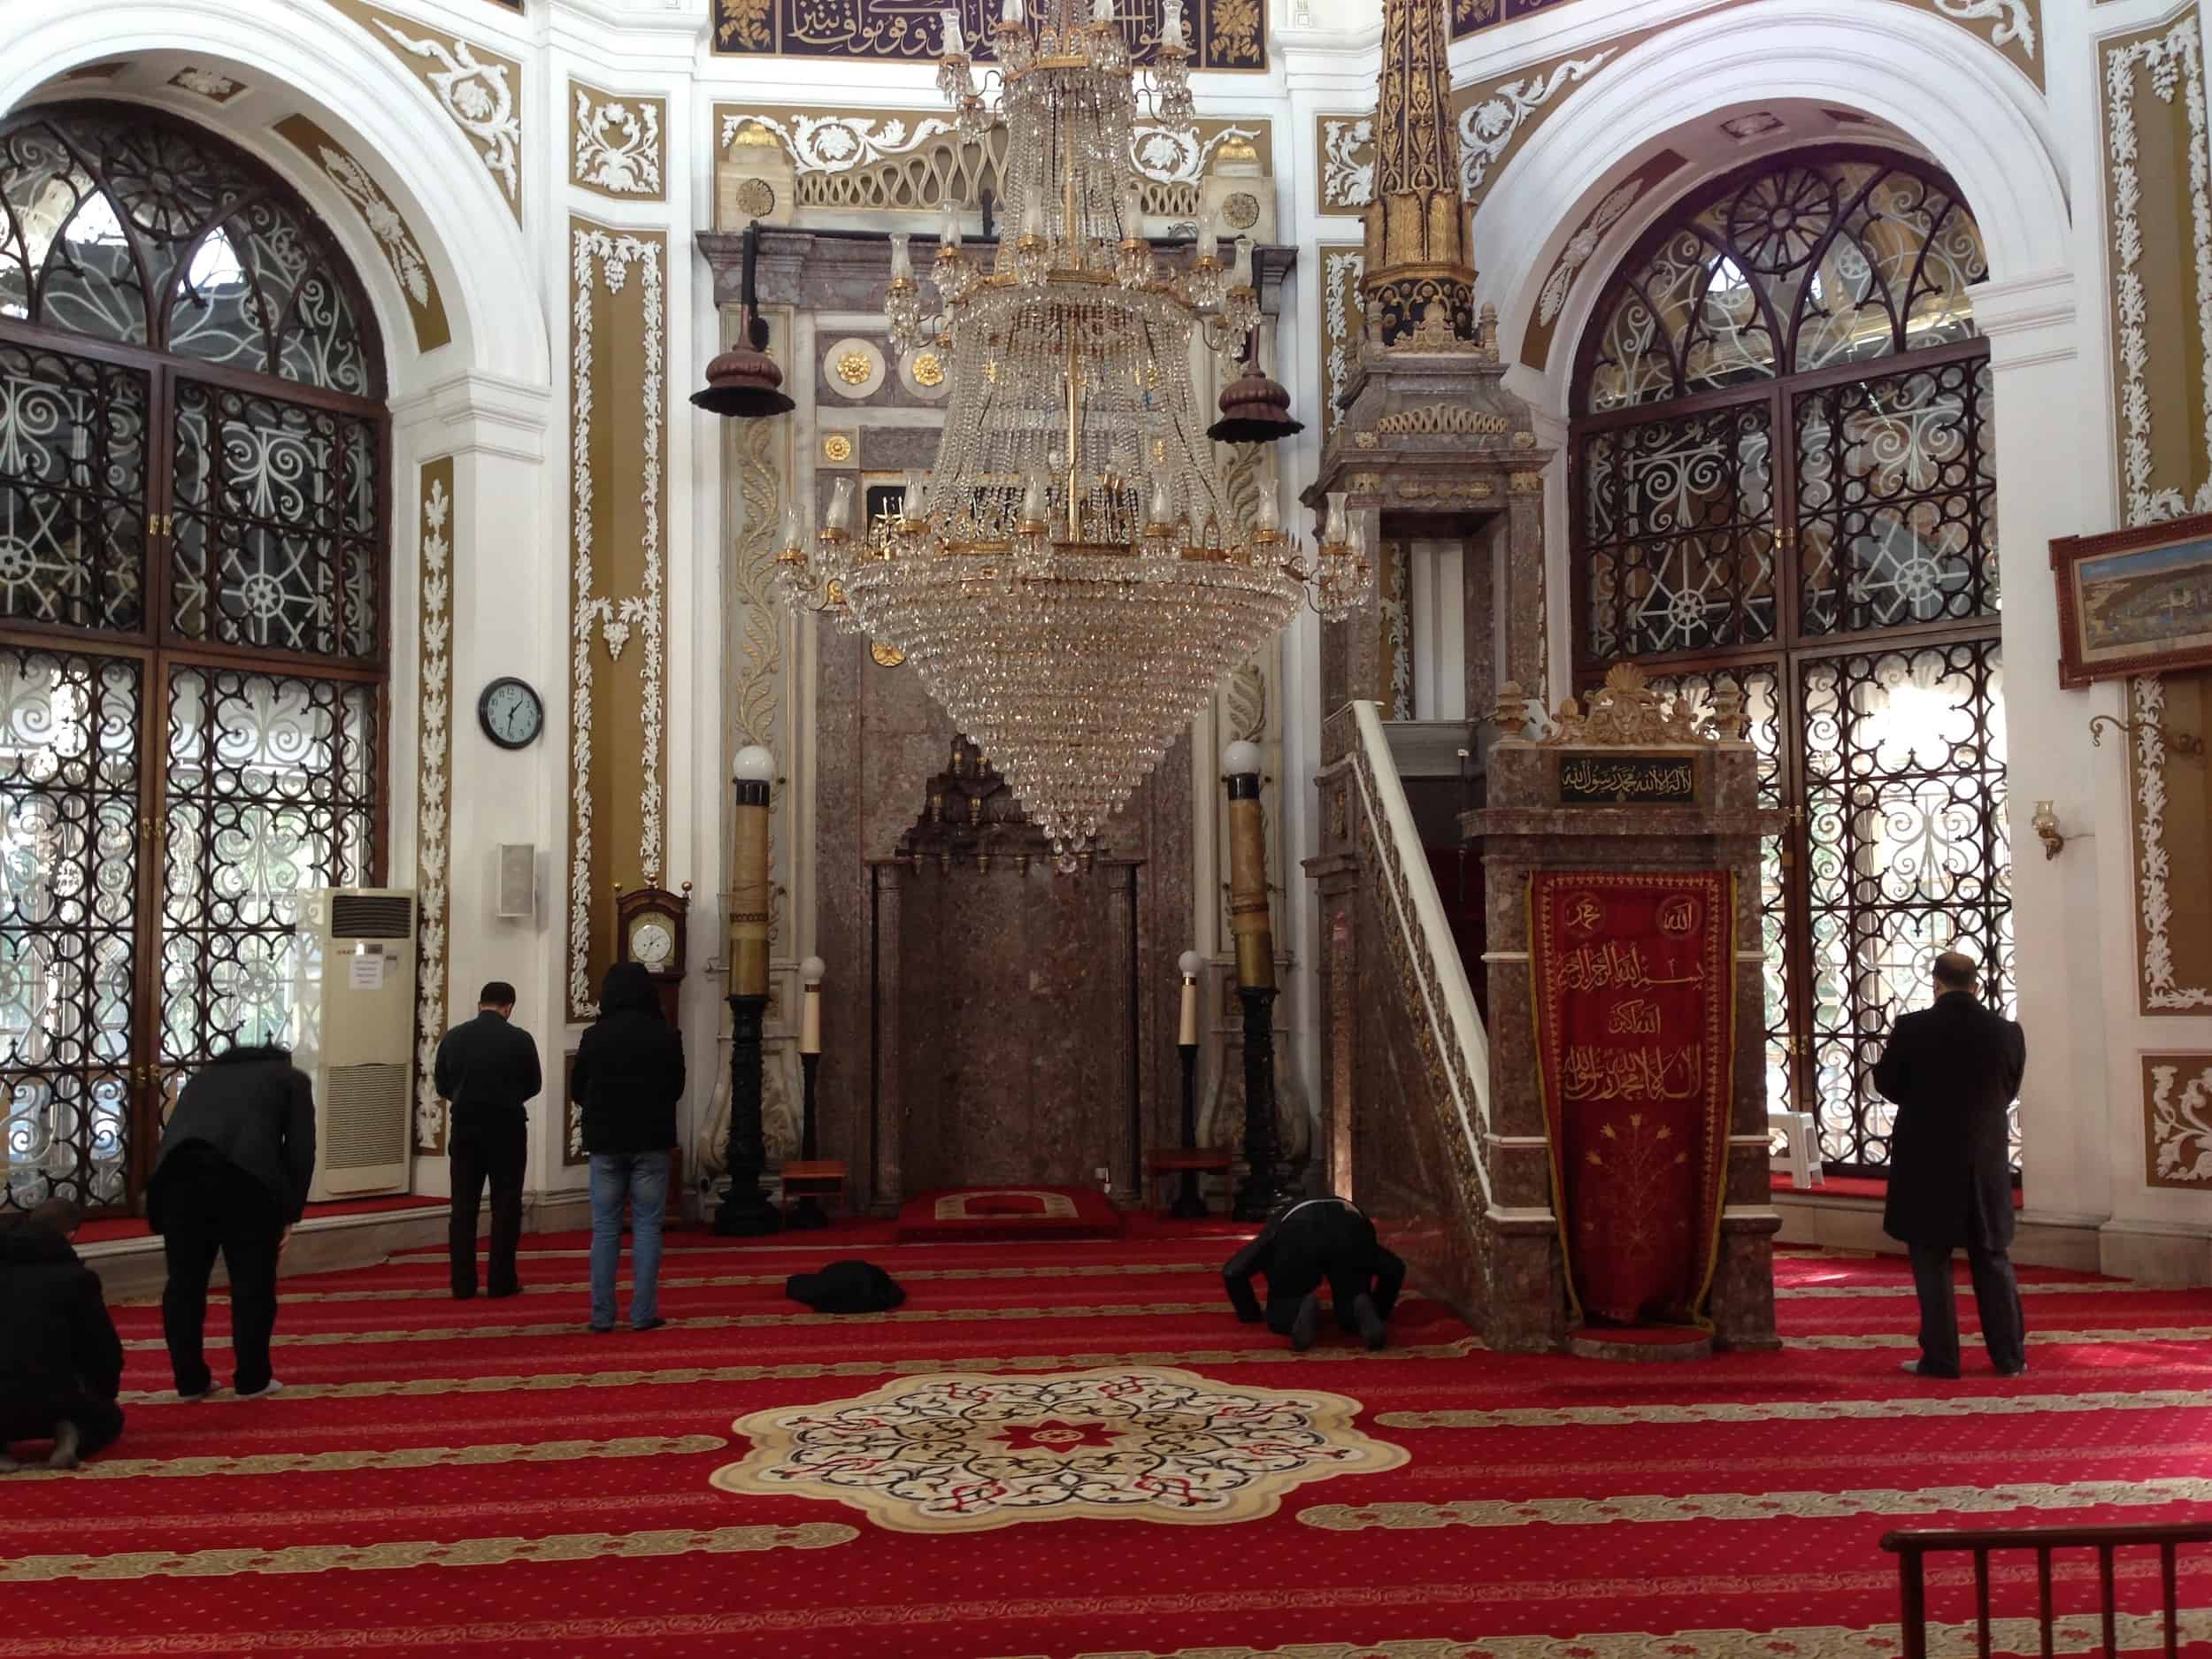 Prayer hall of the Mosque of the Blessed Mantle in Fatih, Istanbul, Turkey